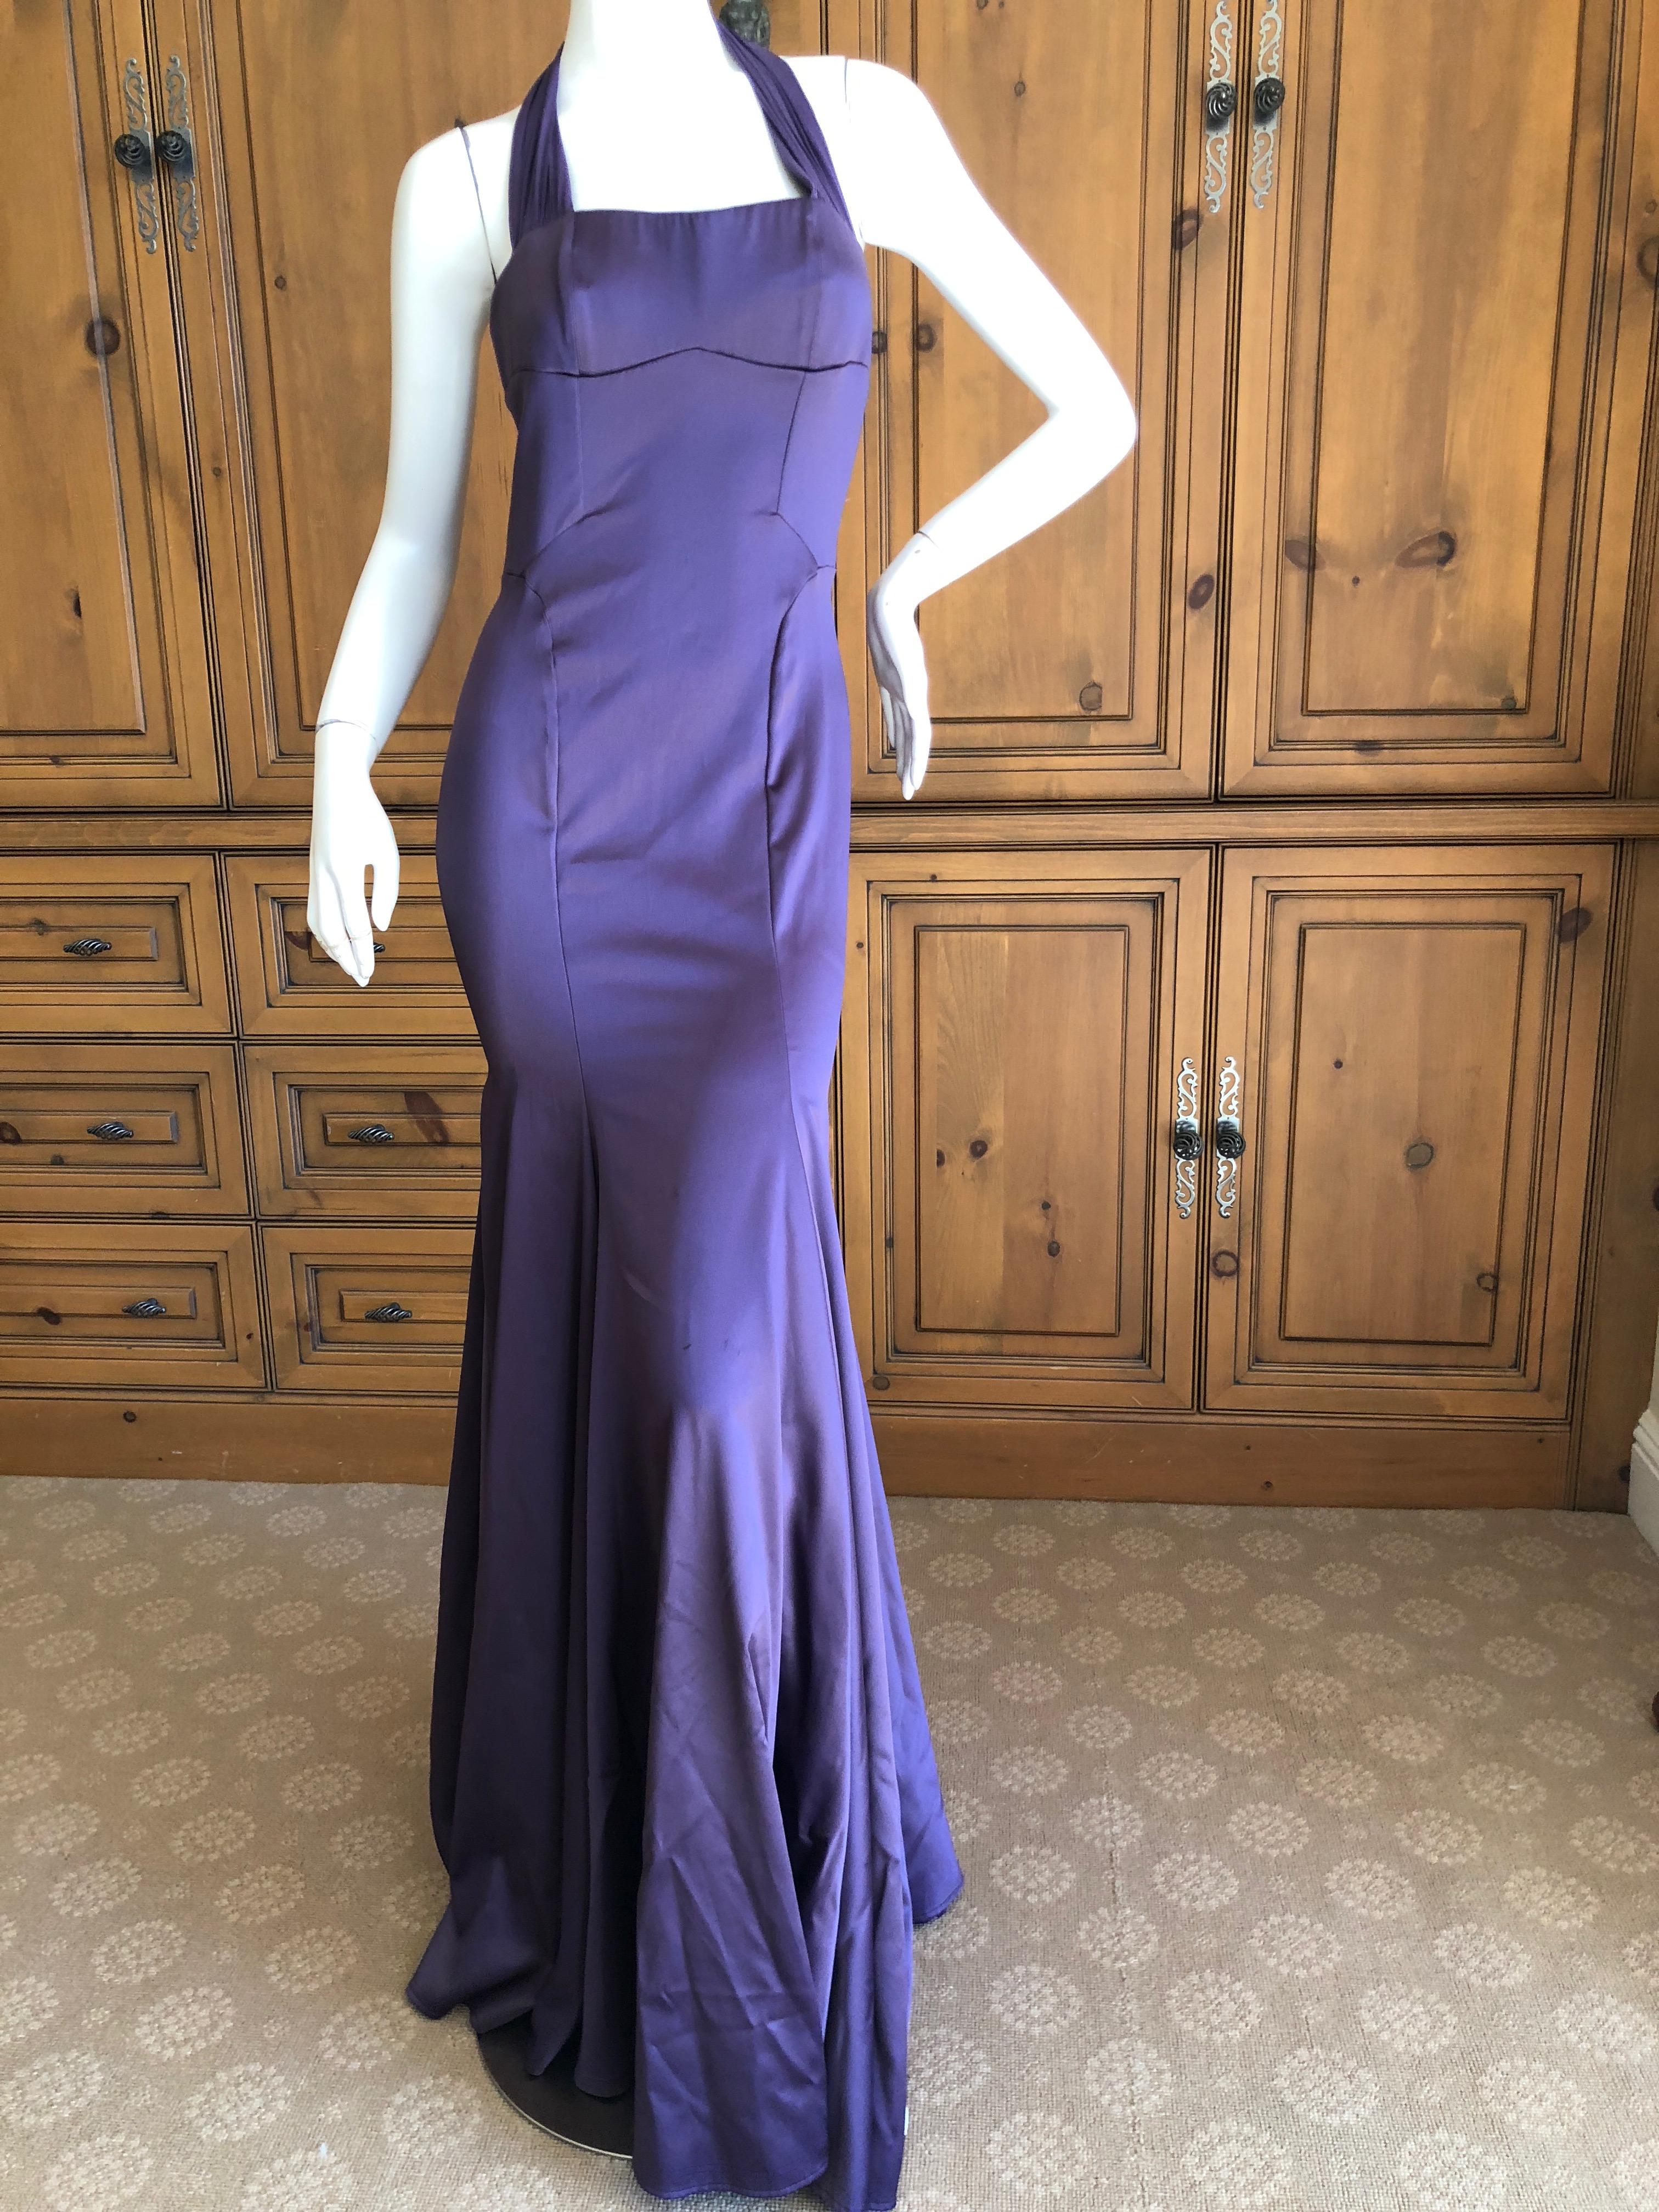 Roberto Cavalli Vintage Purple Silk Mermaid Evening Dress for Just Cavalli.
Sculpted to the body, with miles of silk in the train , this is just wonderful.
Size 42, but runs small.
Bust 34